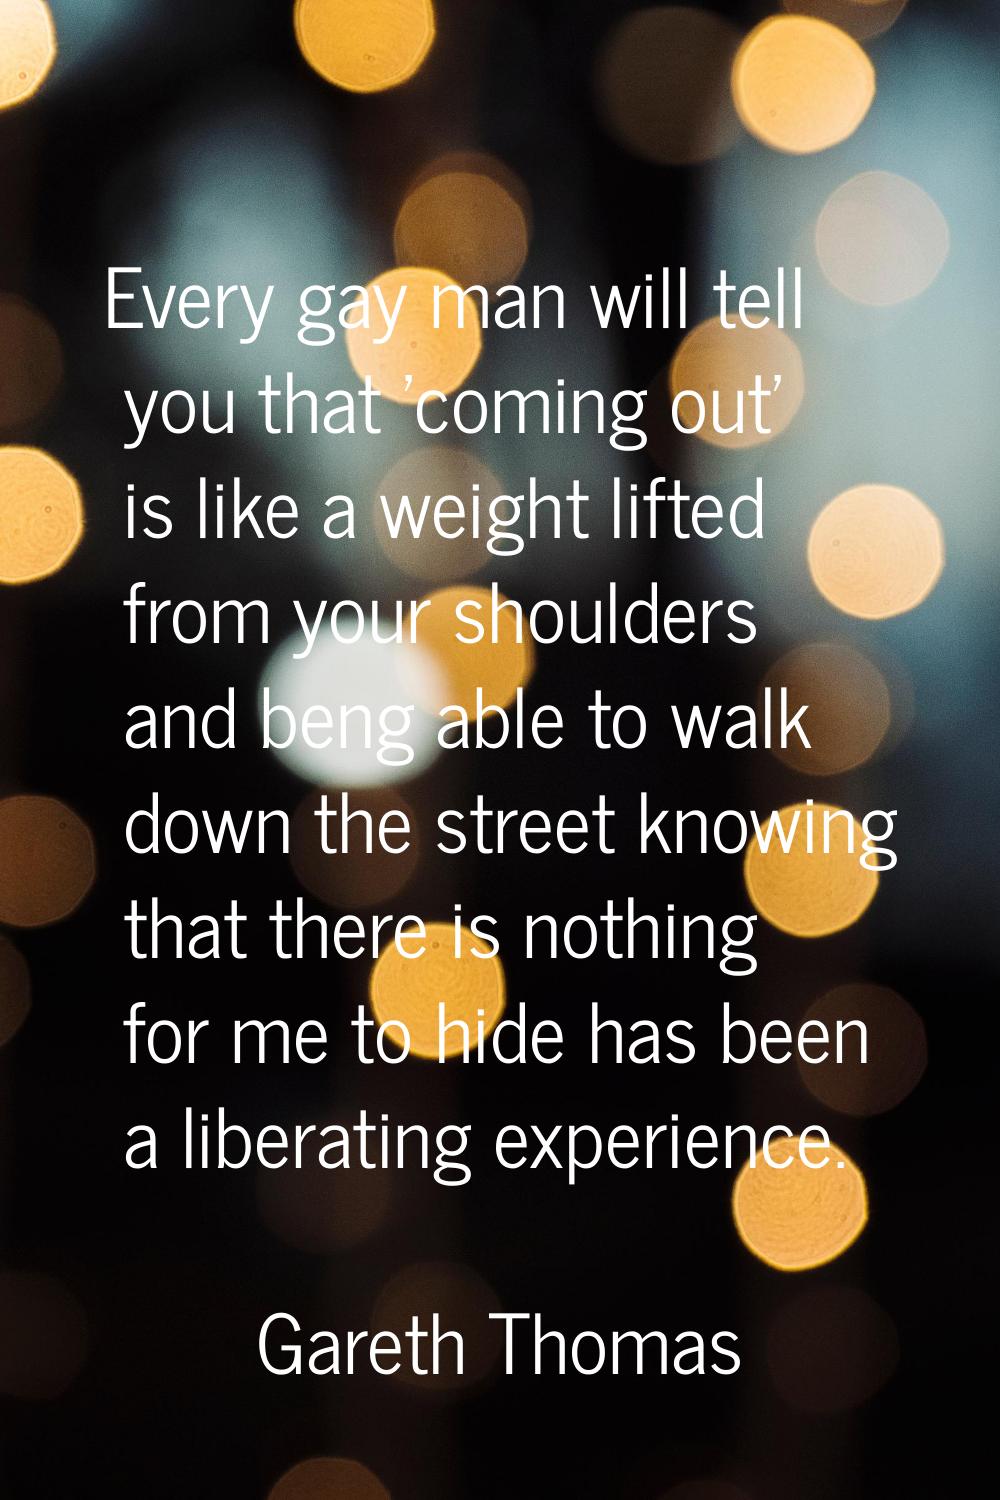 Every gay man will tell you that 'coming out' is like a weight lifted from your shoulders and beng 